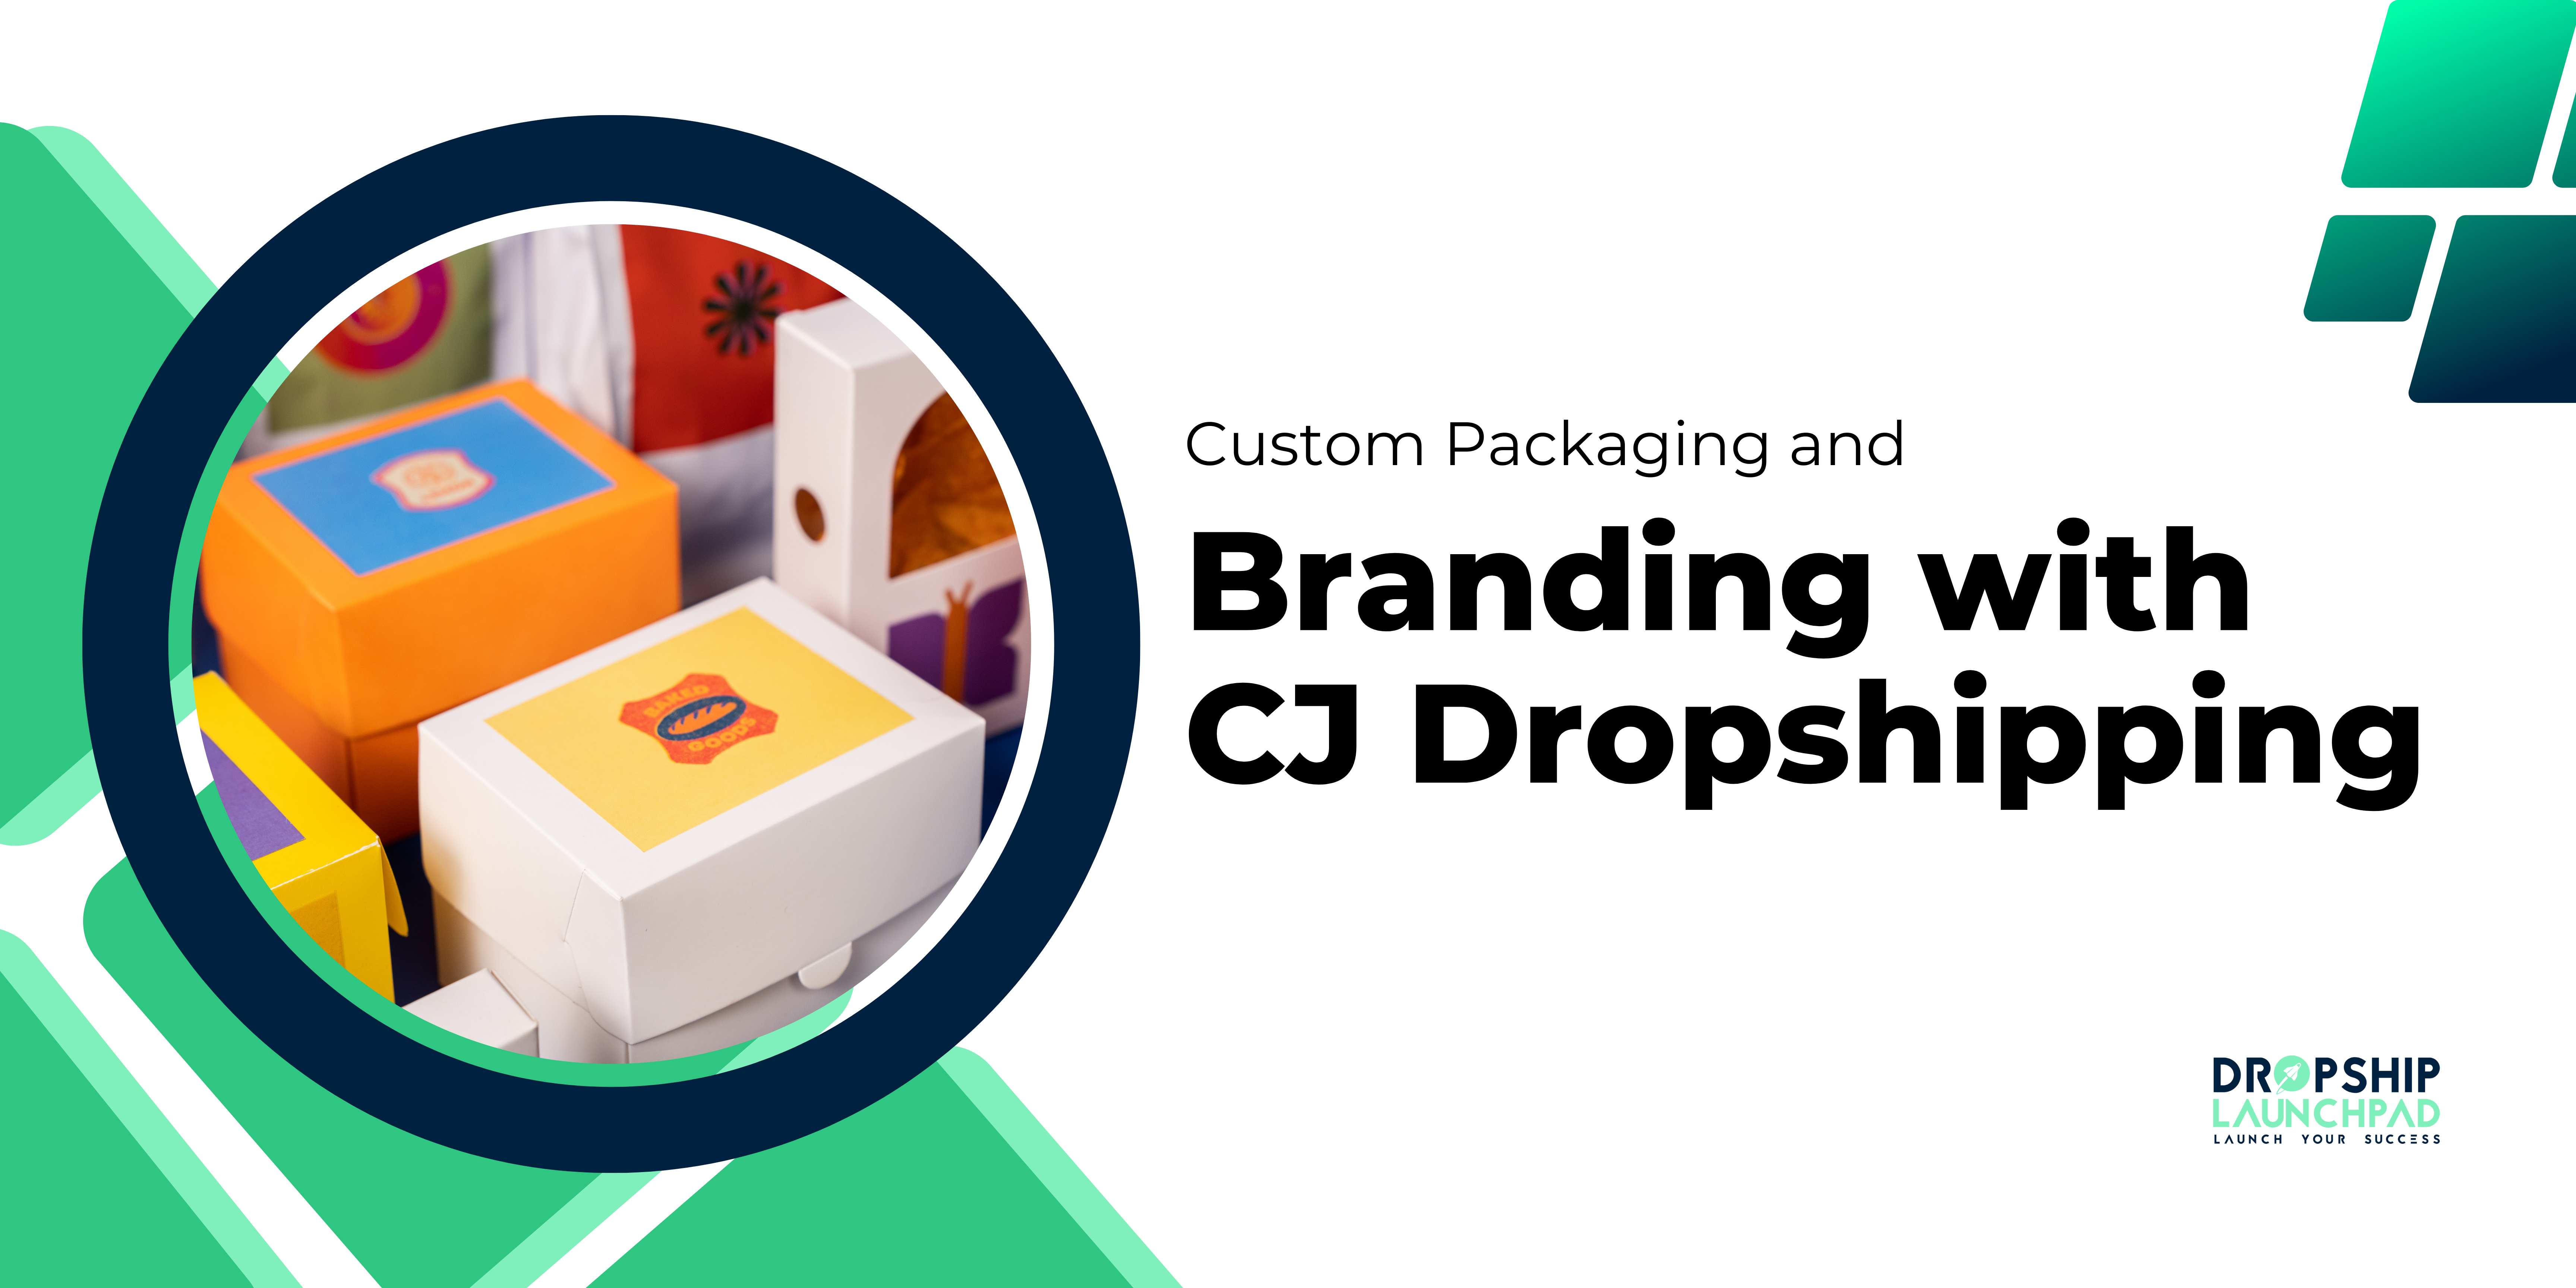 Custom Packaging and Branding with CJ Dropshipping